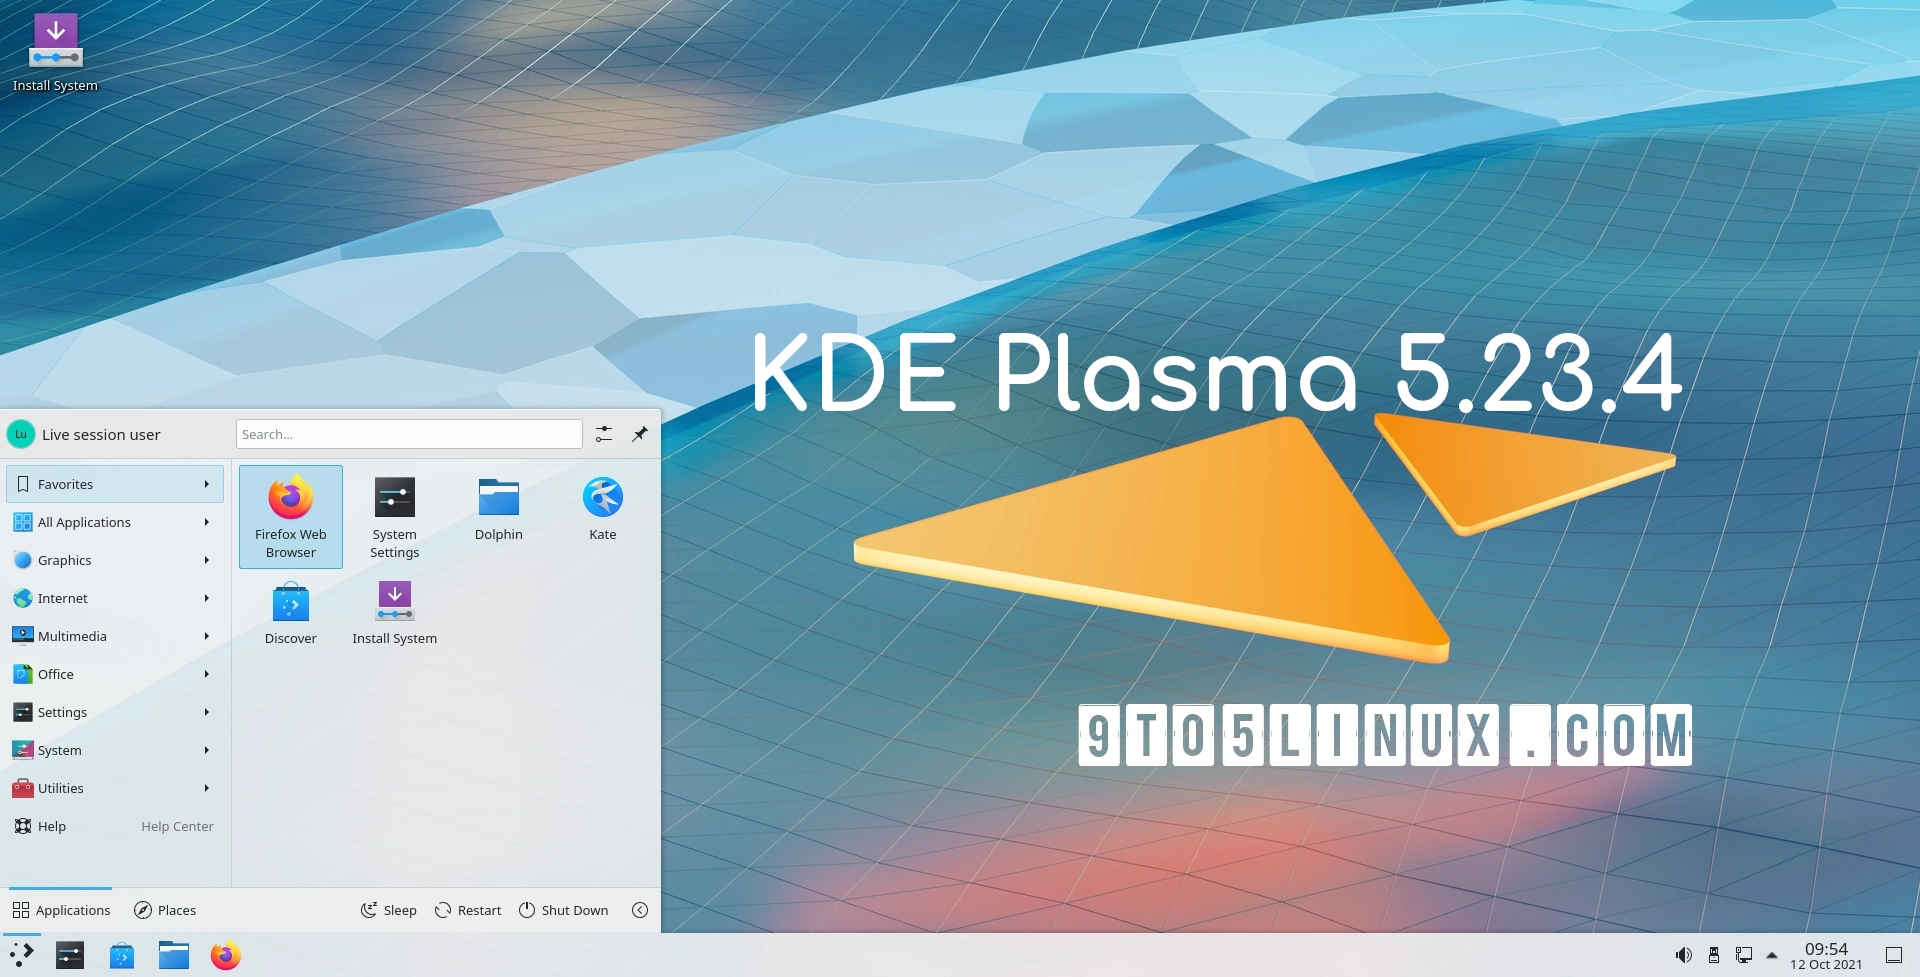 KDE Plasma 5.23.4 Update Brings Back the Touchpad Applet, Fixes More Bugs